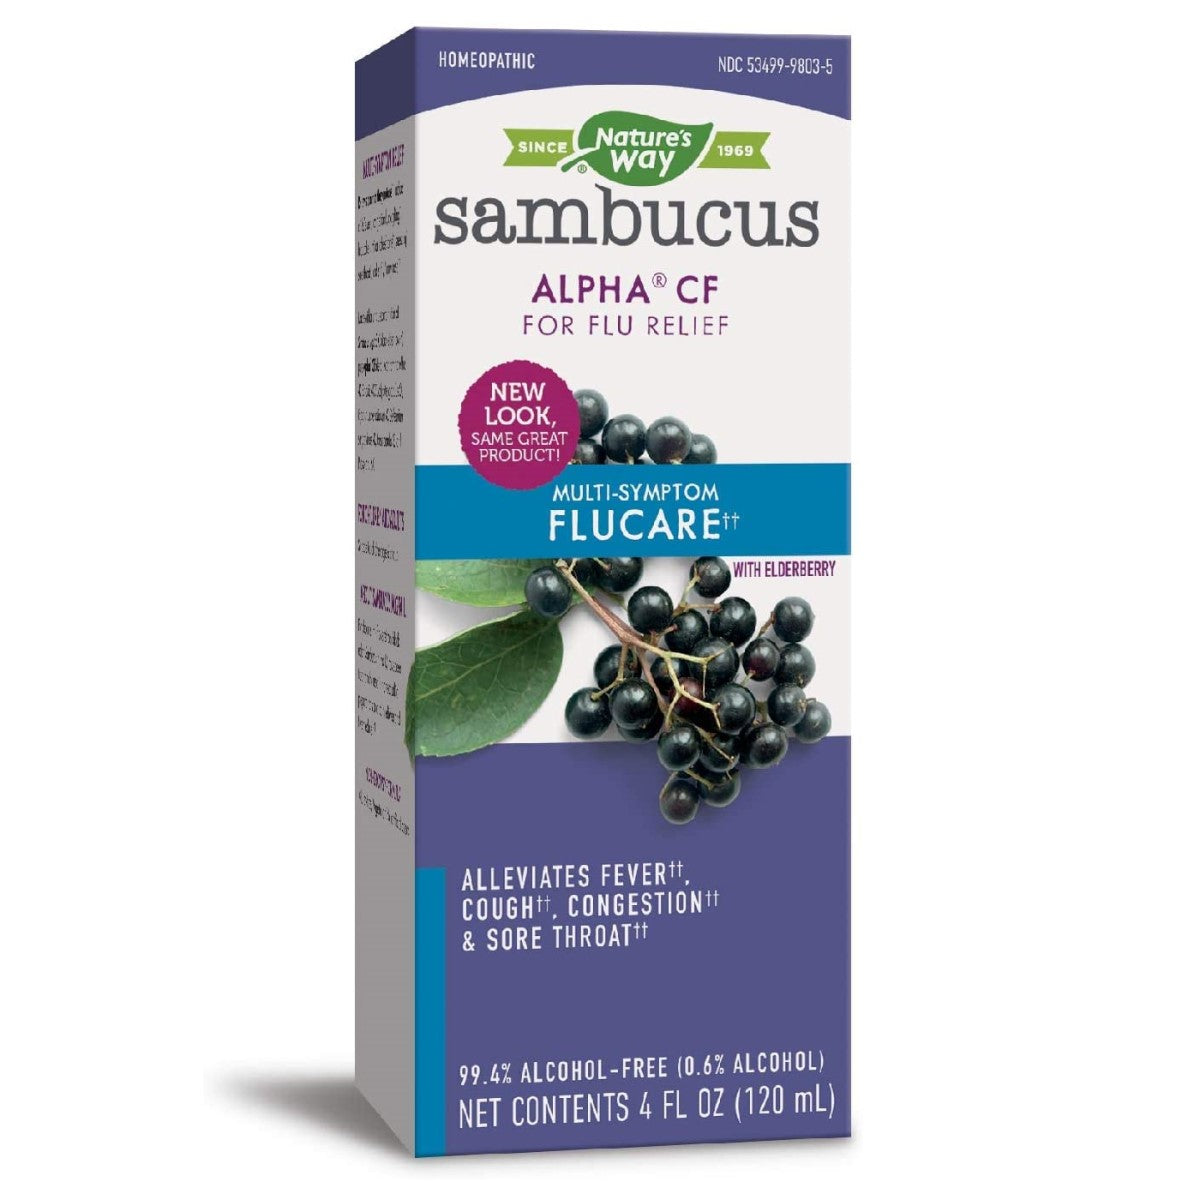 Primary image of Sambucus FluCare Syrup